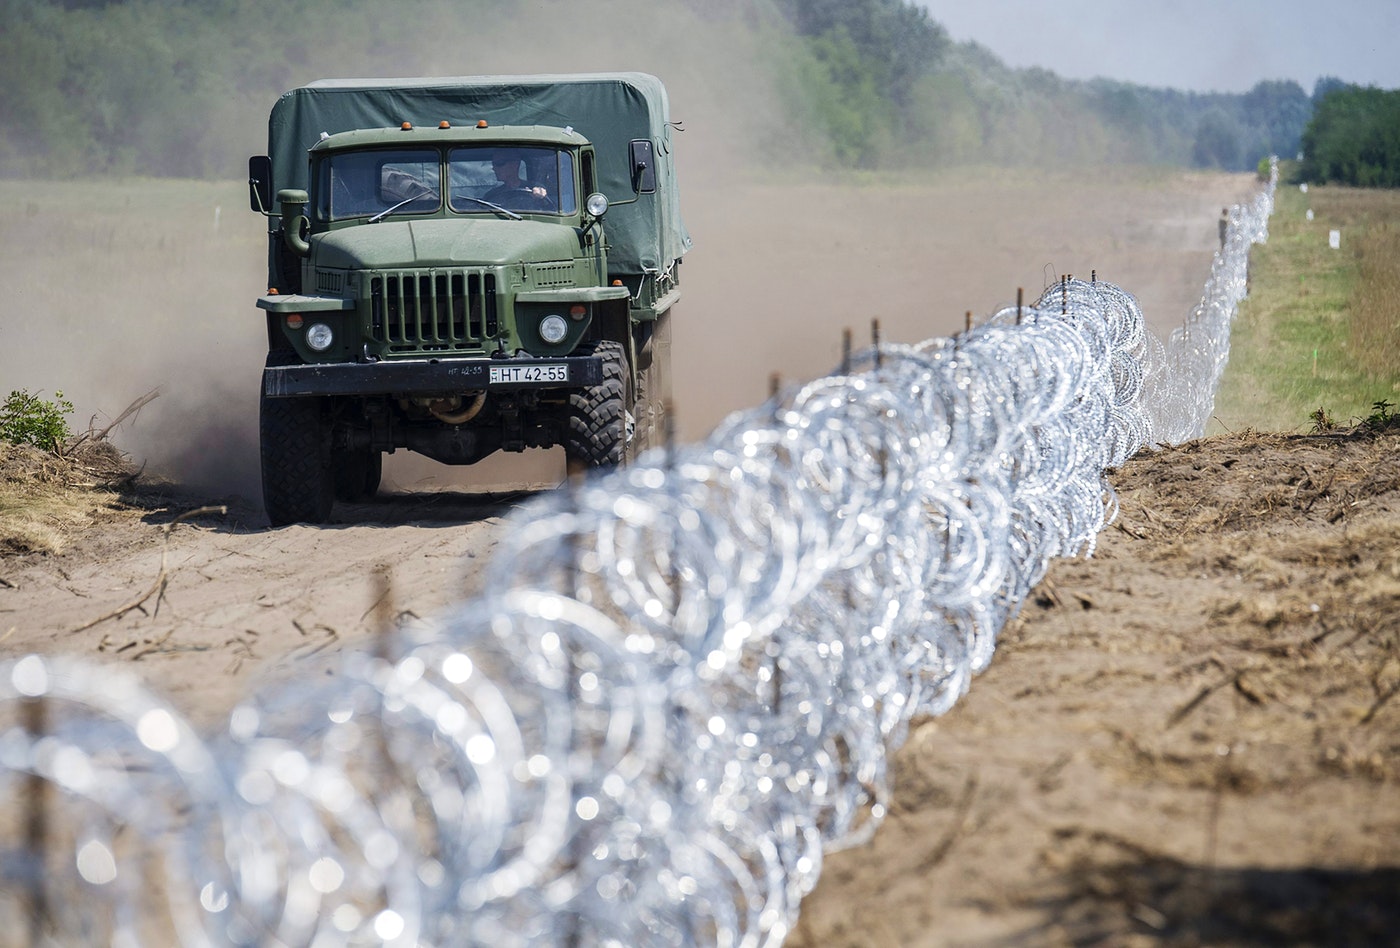 A Hungarian military truck passes a barbed-wire section of a 108-mile (175km) fence on Hungary’s southern border with Serbia near Kelebia, 110 miles (178 km) southeast of Budapest, Hungary, on Friday, Aug. 7, 2015. (Sandor Ujvari/MTI via AP)